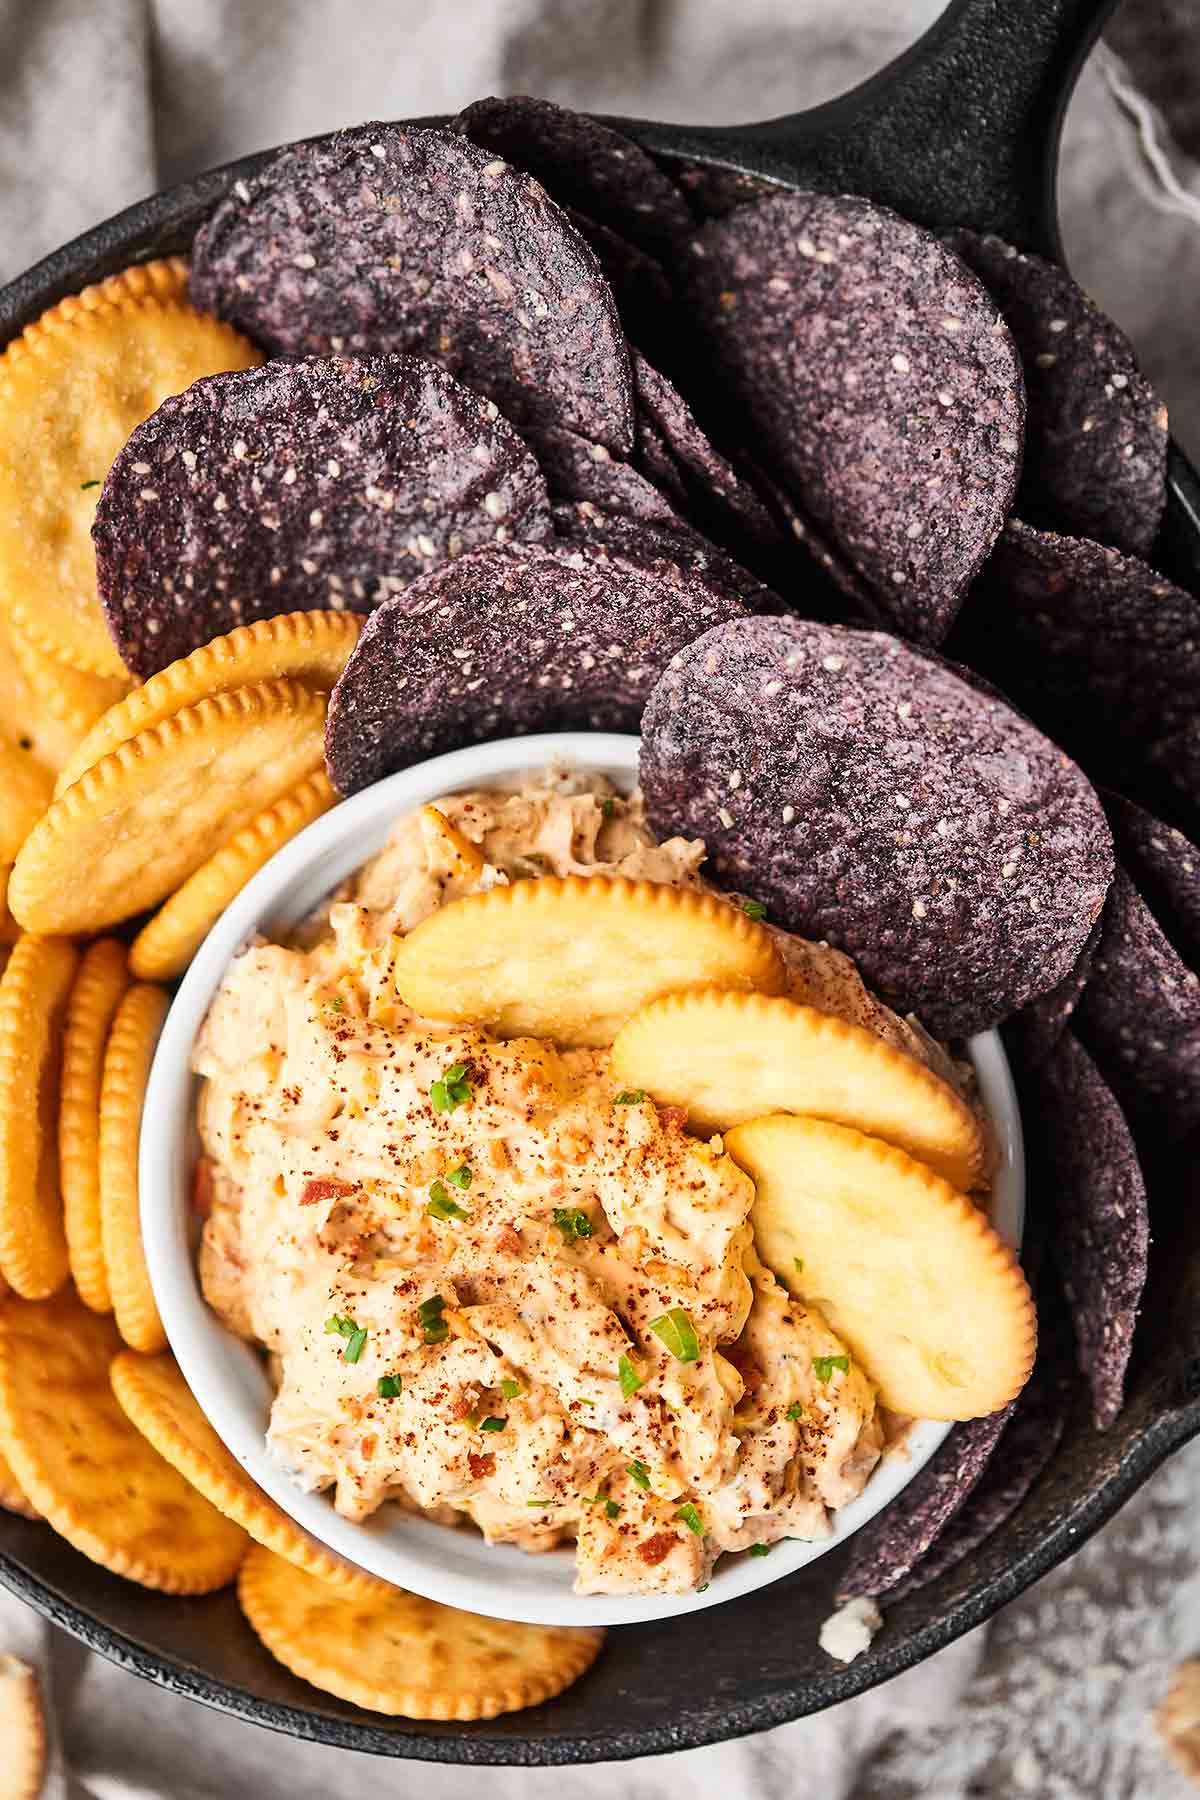 Bowl of crack dip on plate with crackers and chips above